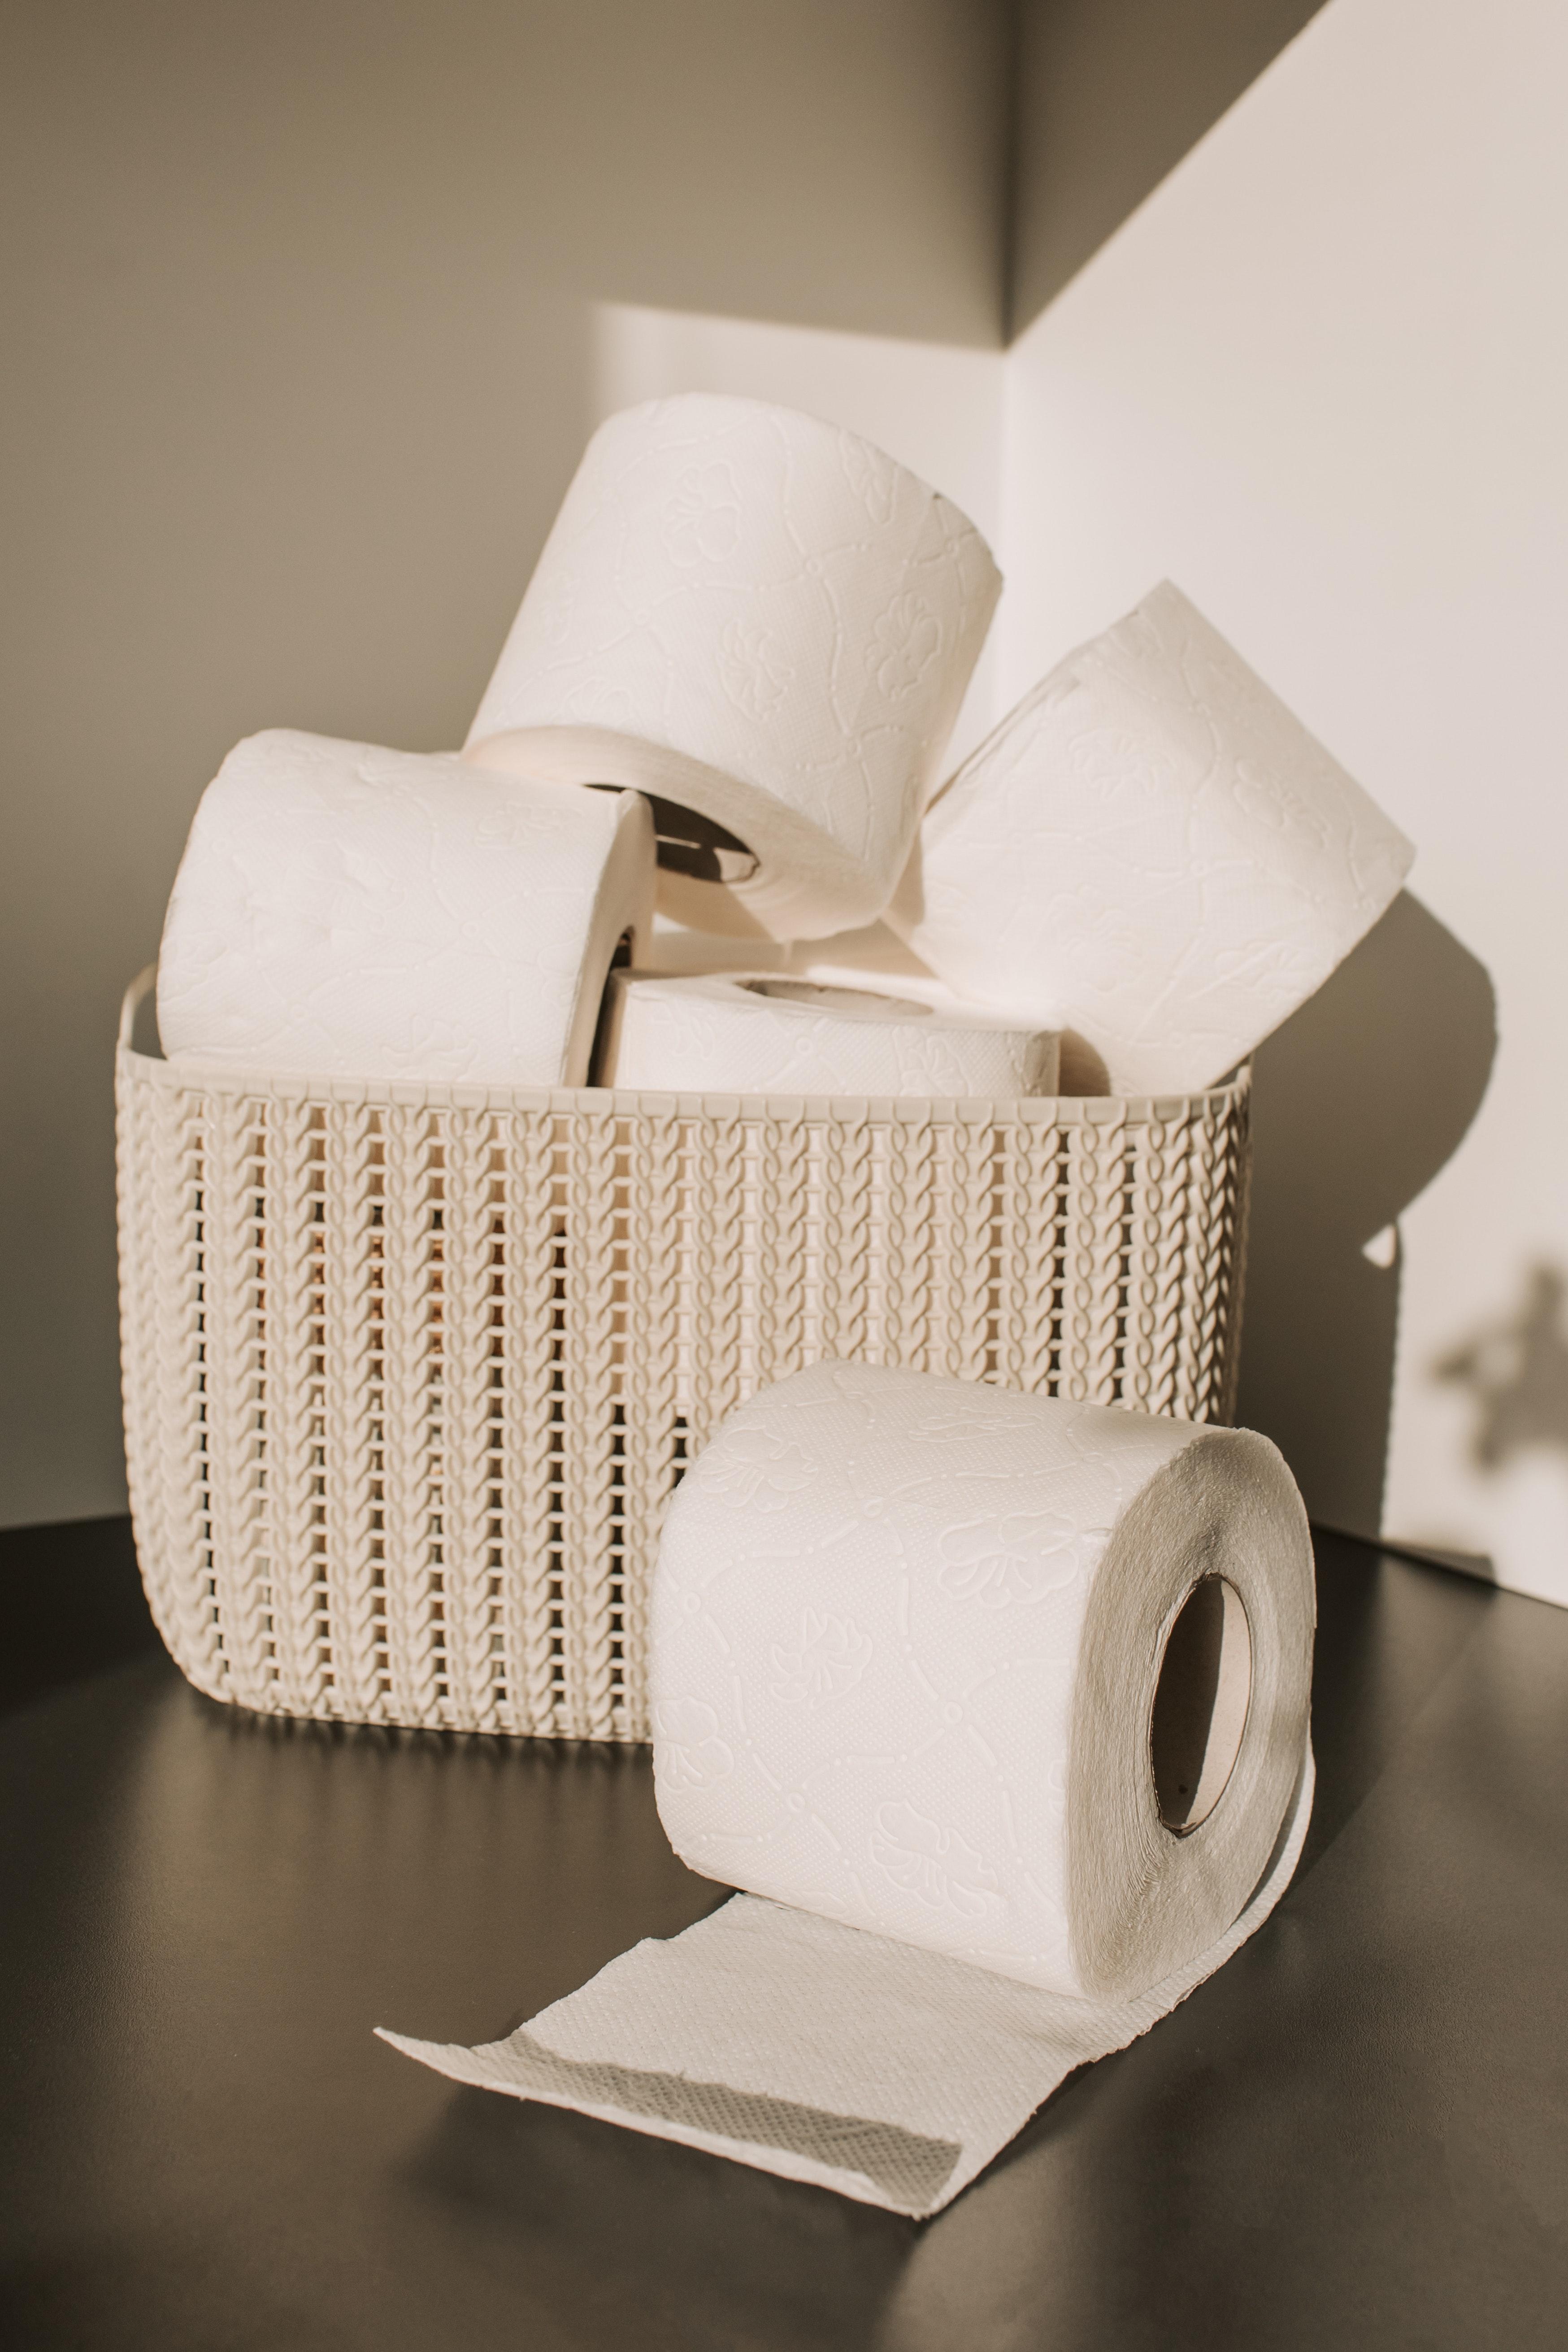  Where Is Most Toilet Paper Made 